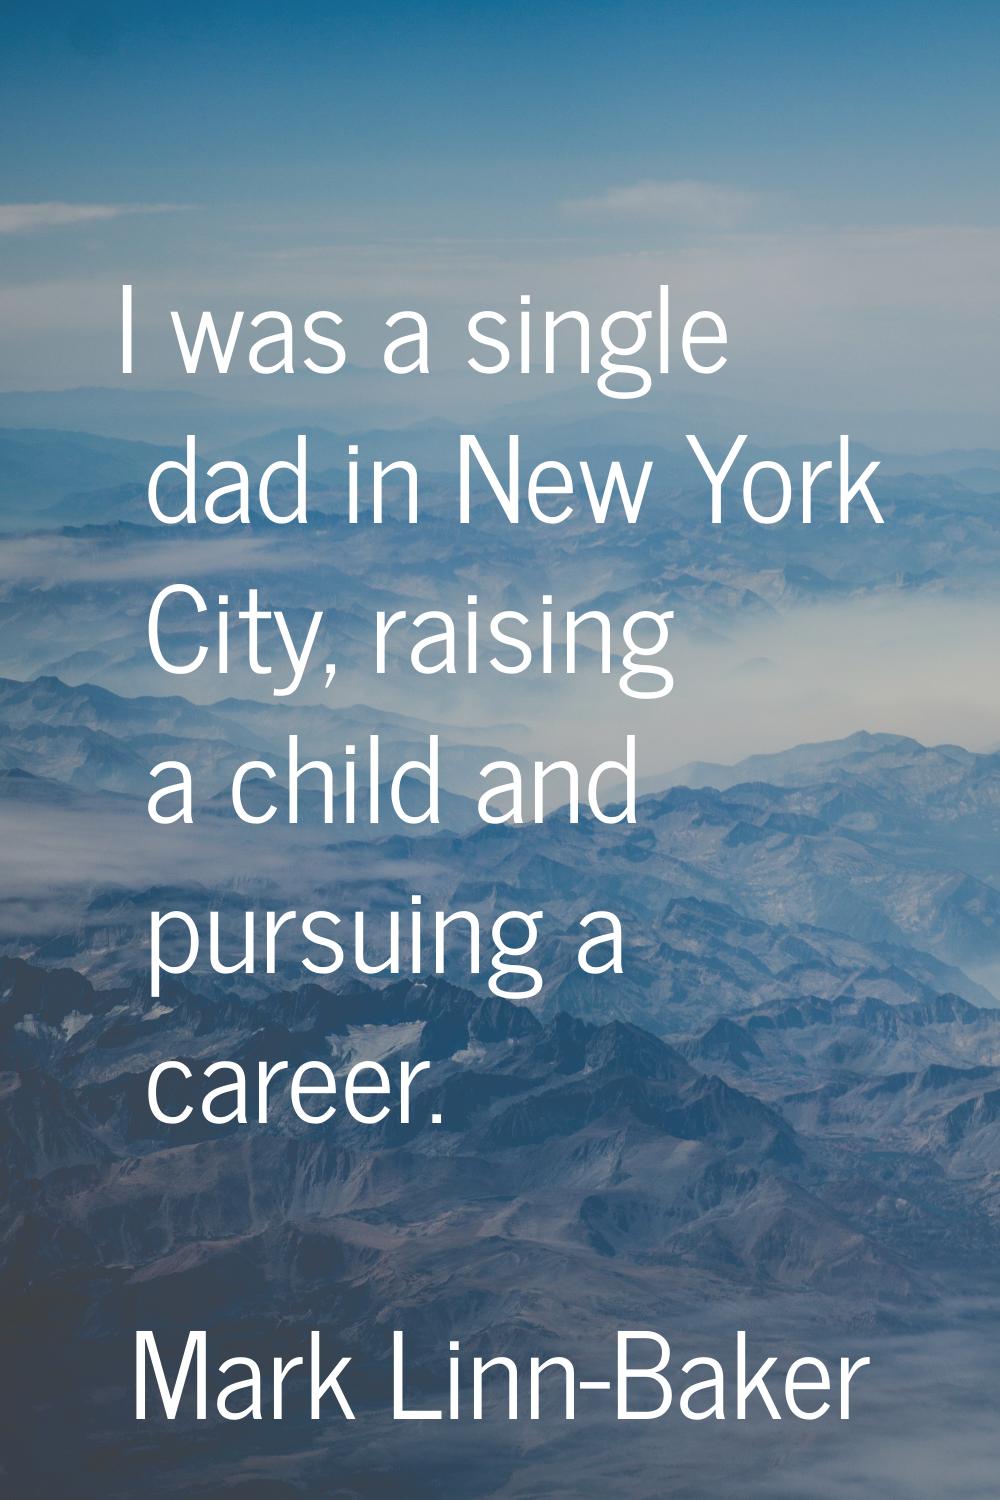 I was a single dad in New York City, raising a child and pursuing a career.